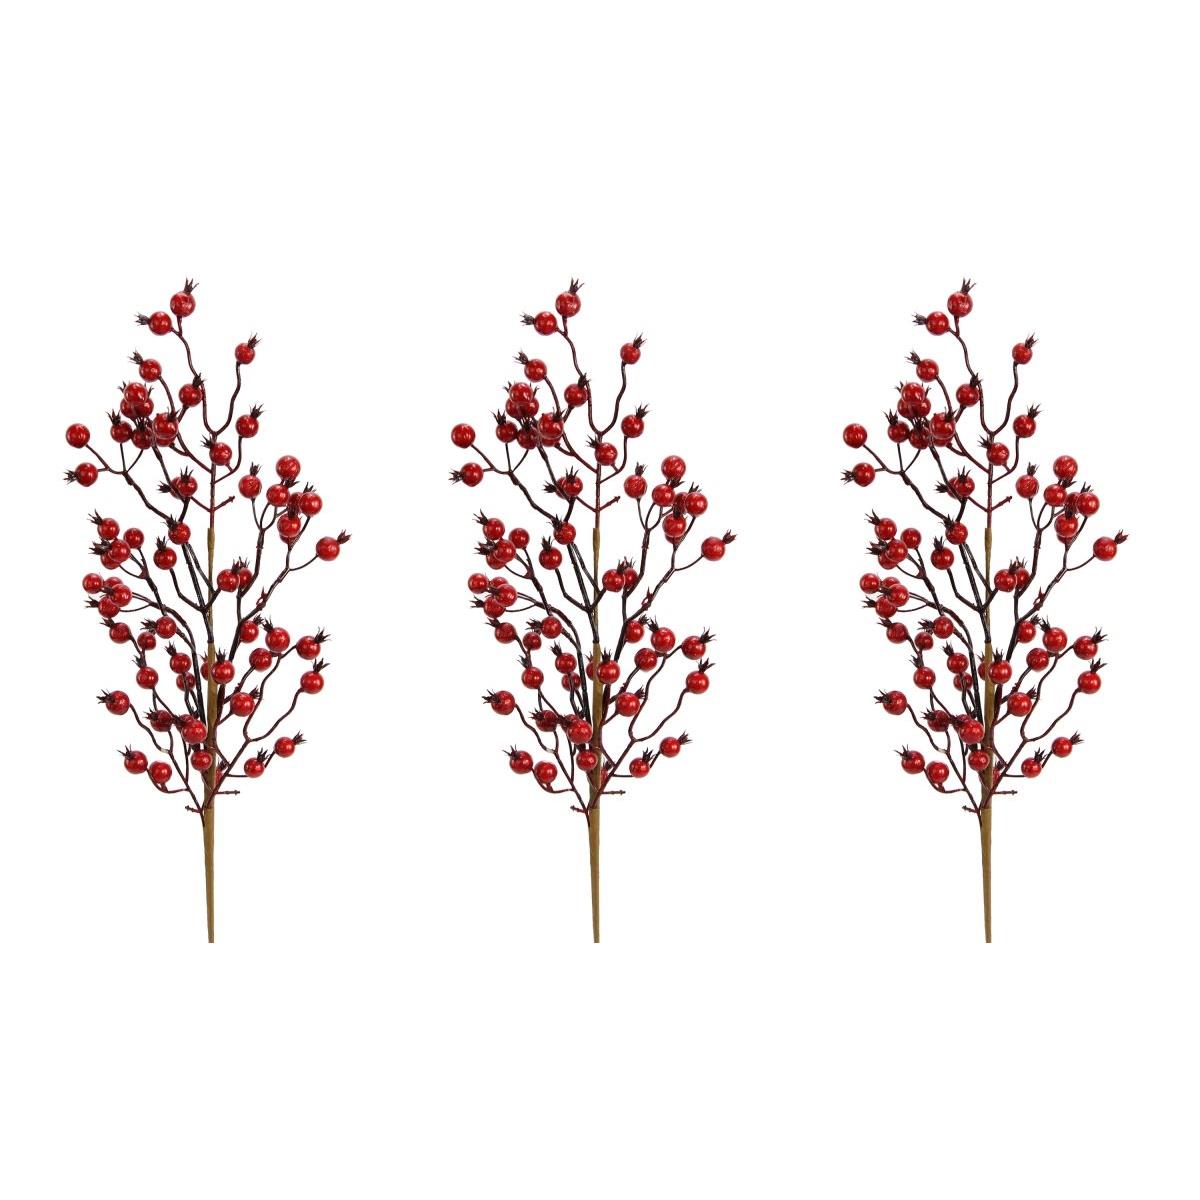 Admired By Nature Gxl7705-red-3 24 In. Faux Red Berry Spray Christmas Decor - Set Of 3